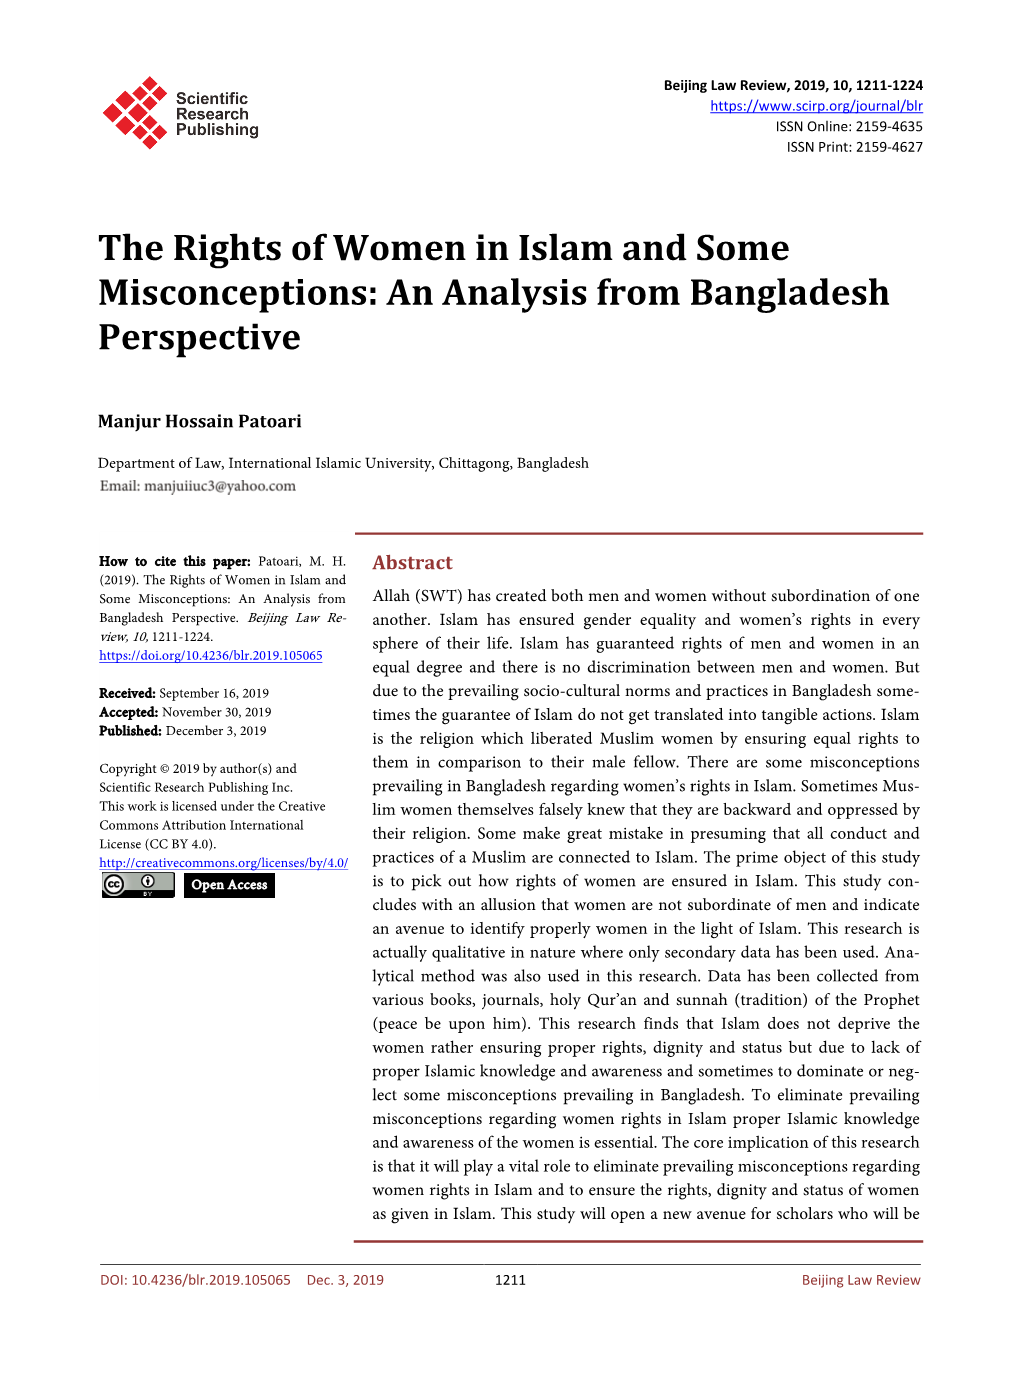 The Rights of Women in Islam and Some Misconceptions: an Analysis from Bangladesh Perspective